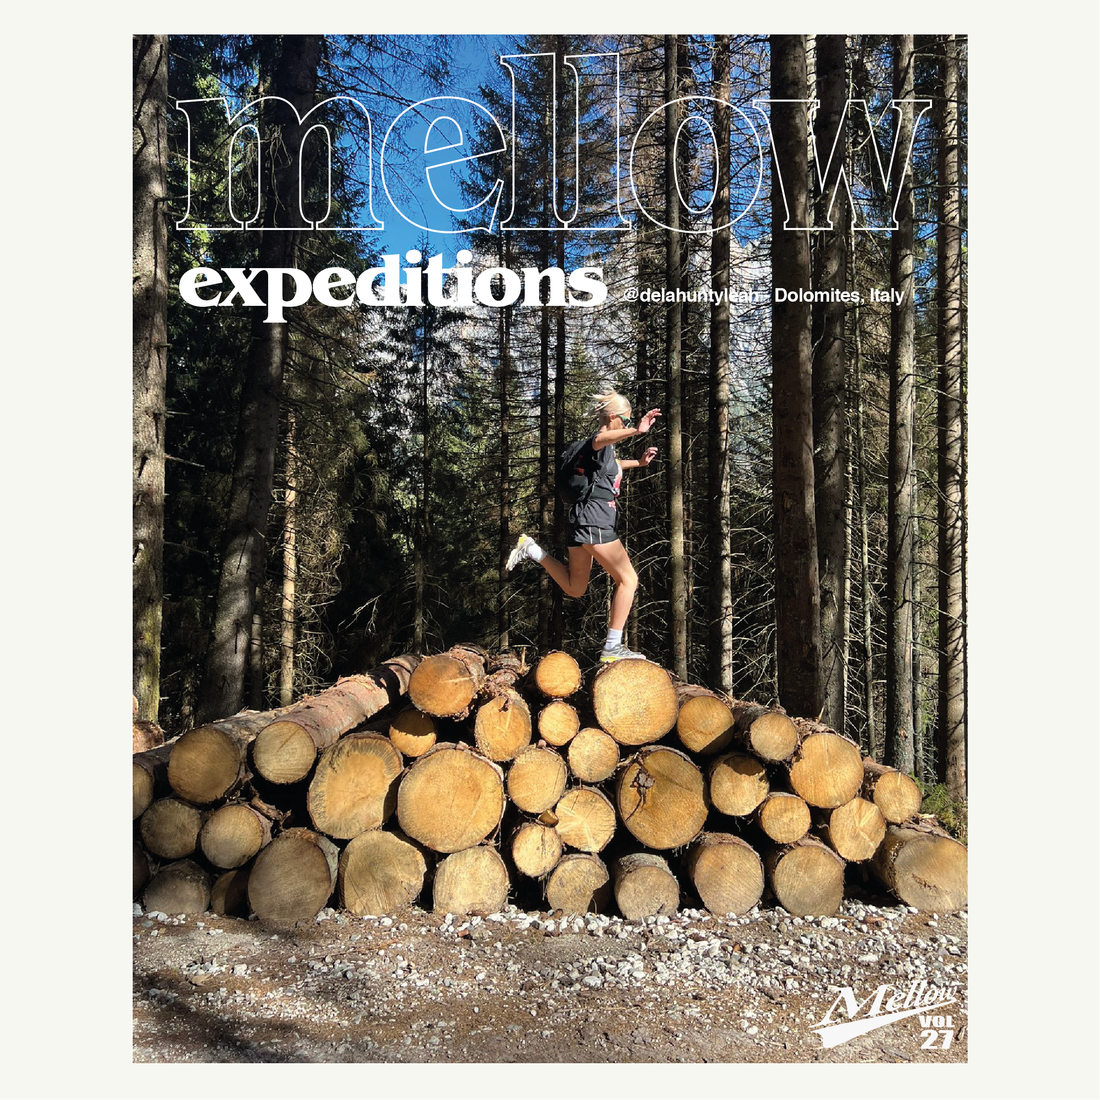 Mellow Expeditions - @delahuntyleah